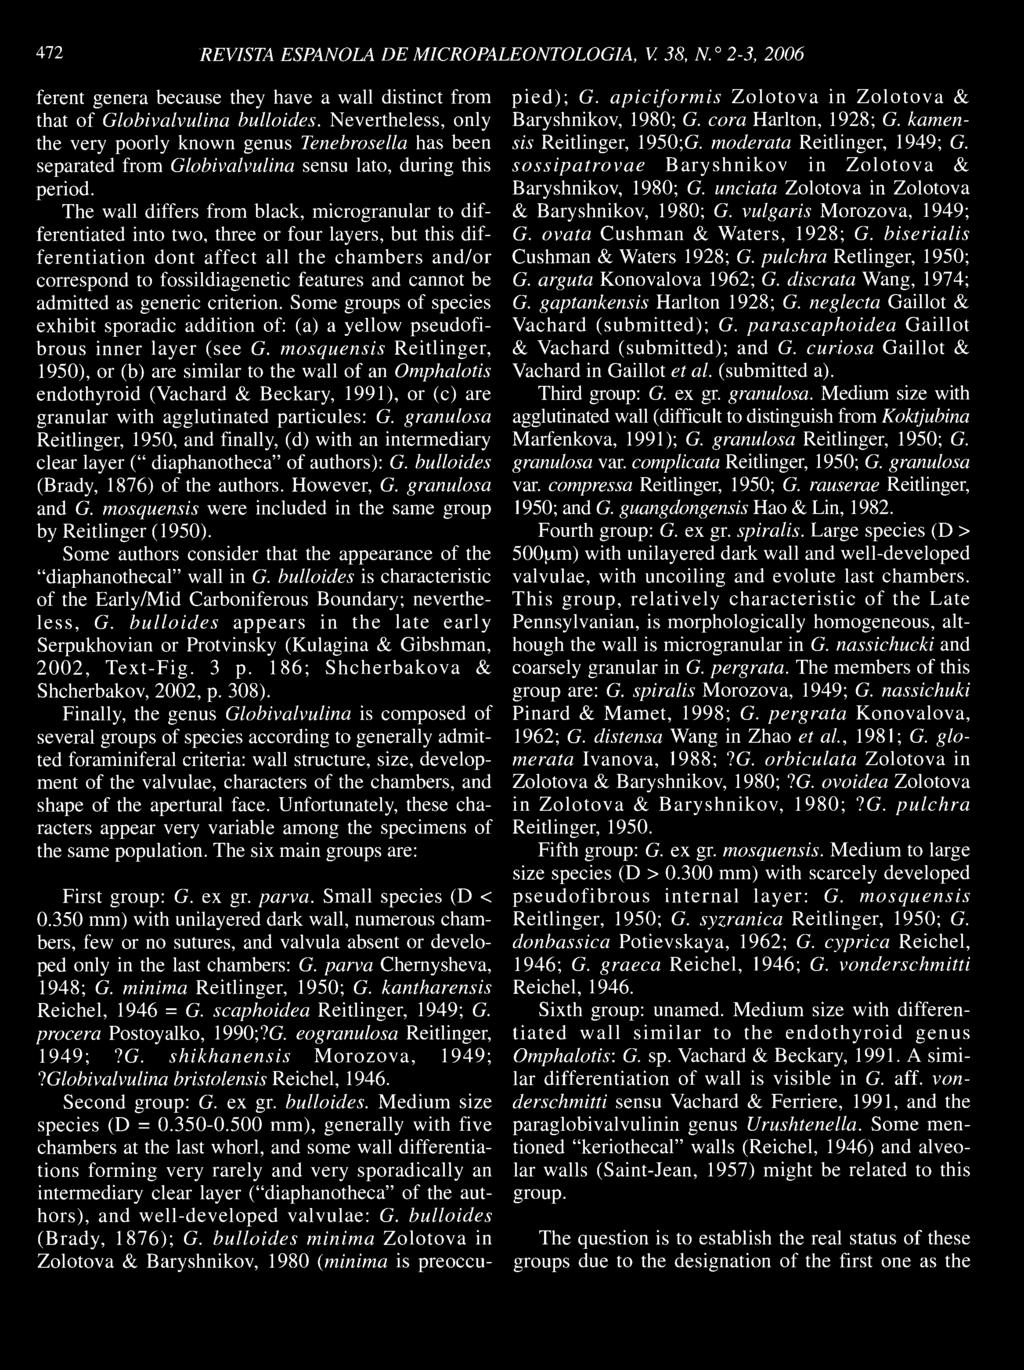 472 REVISTA ESPANOLA DE MICROPALEONTOLOGIA, V. 38, N. 2-3, 2006 ferent genera because they have a wall distinct from that of Globivalvulina bulloides.